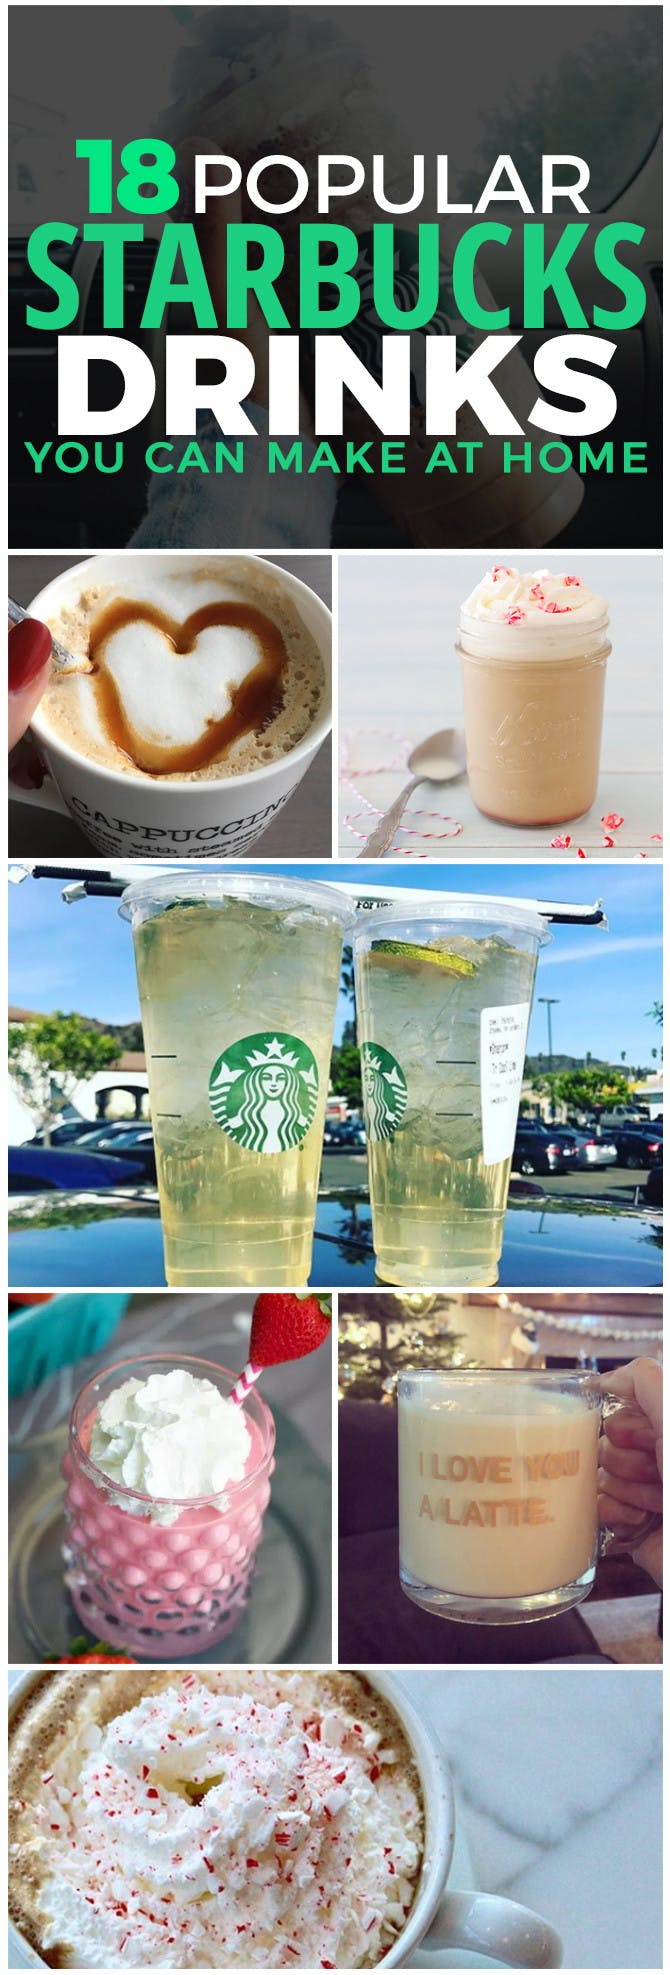 29 Starbucks Drinks You Can Make at Home - The Krazy Coupon Lady